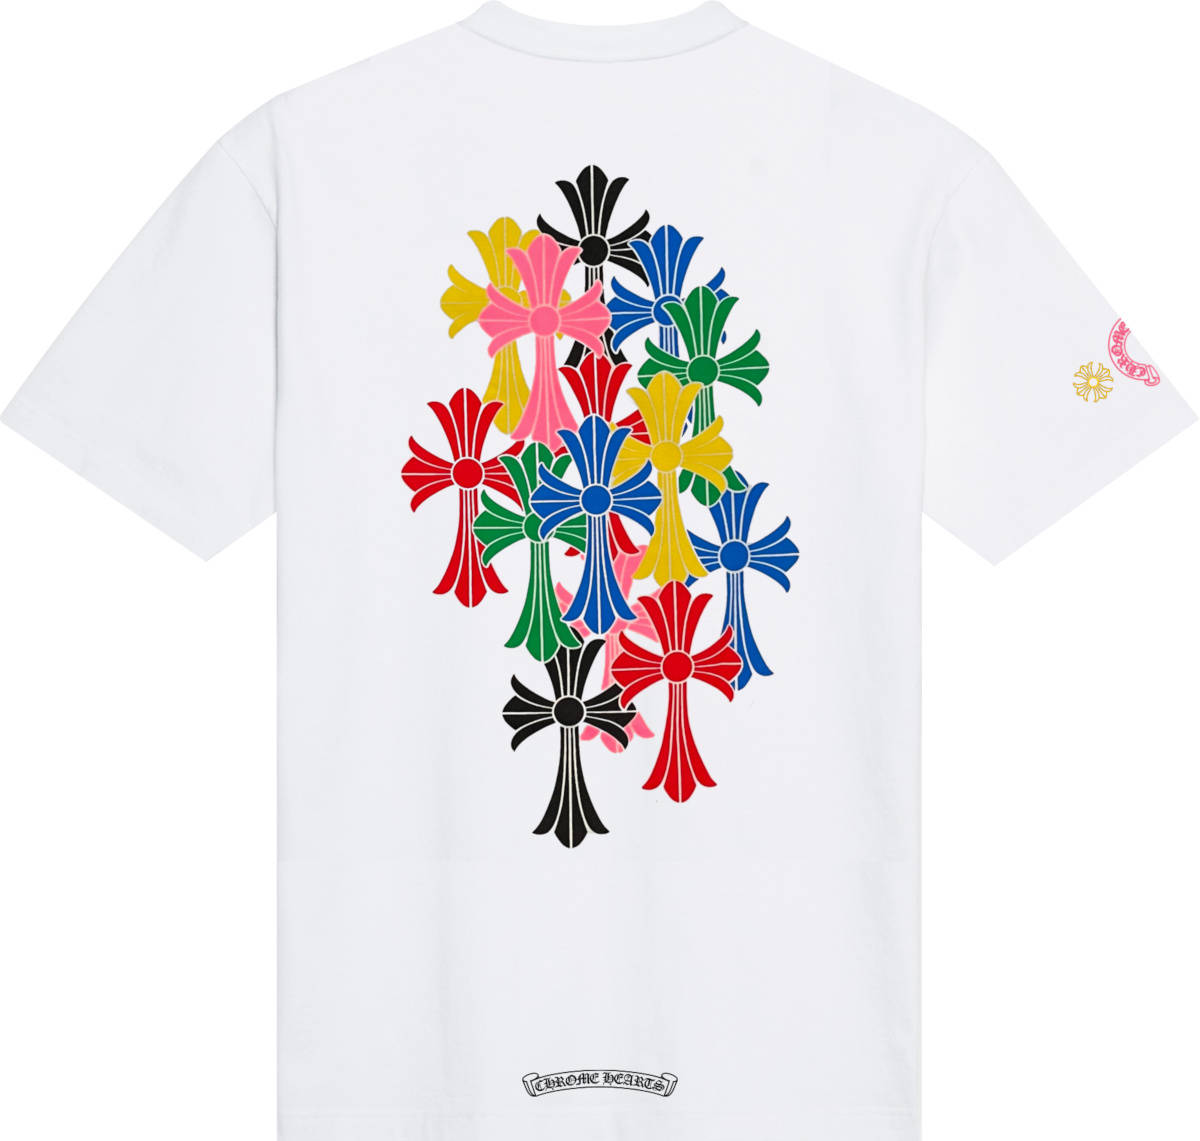 Colorful Chrome Hearts On White Shirt Wallpaper